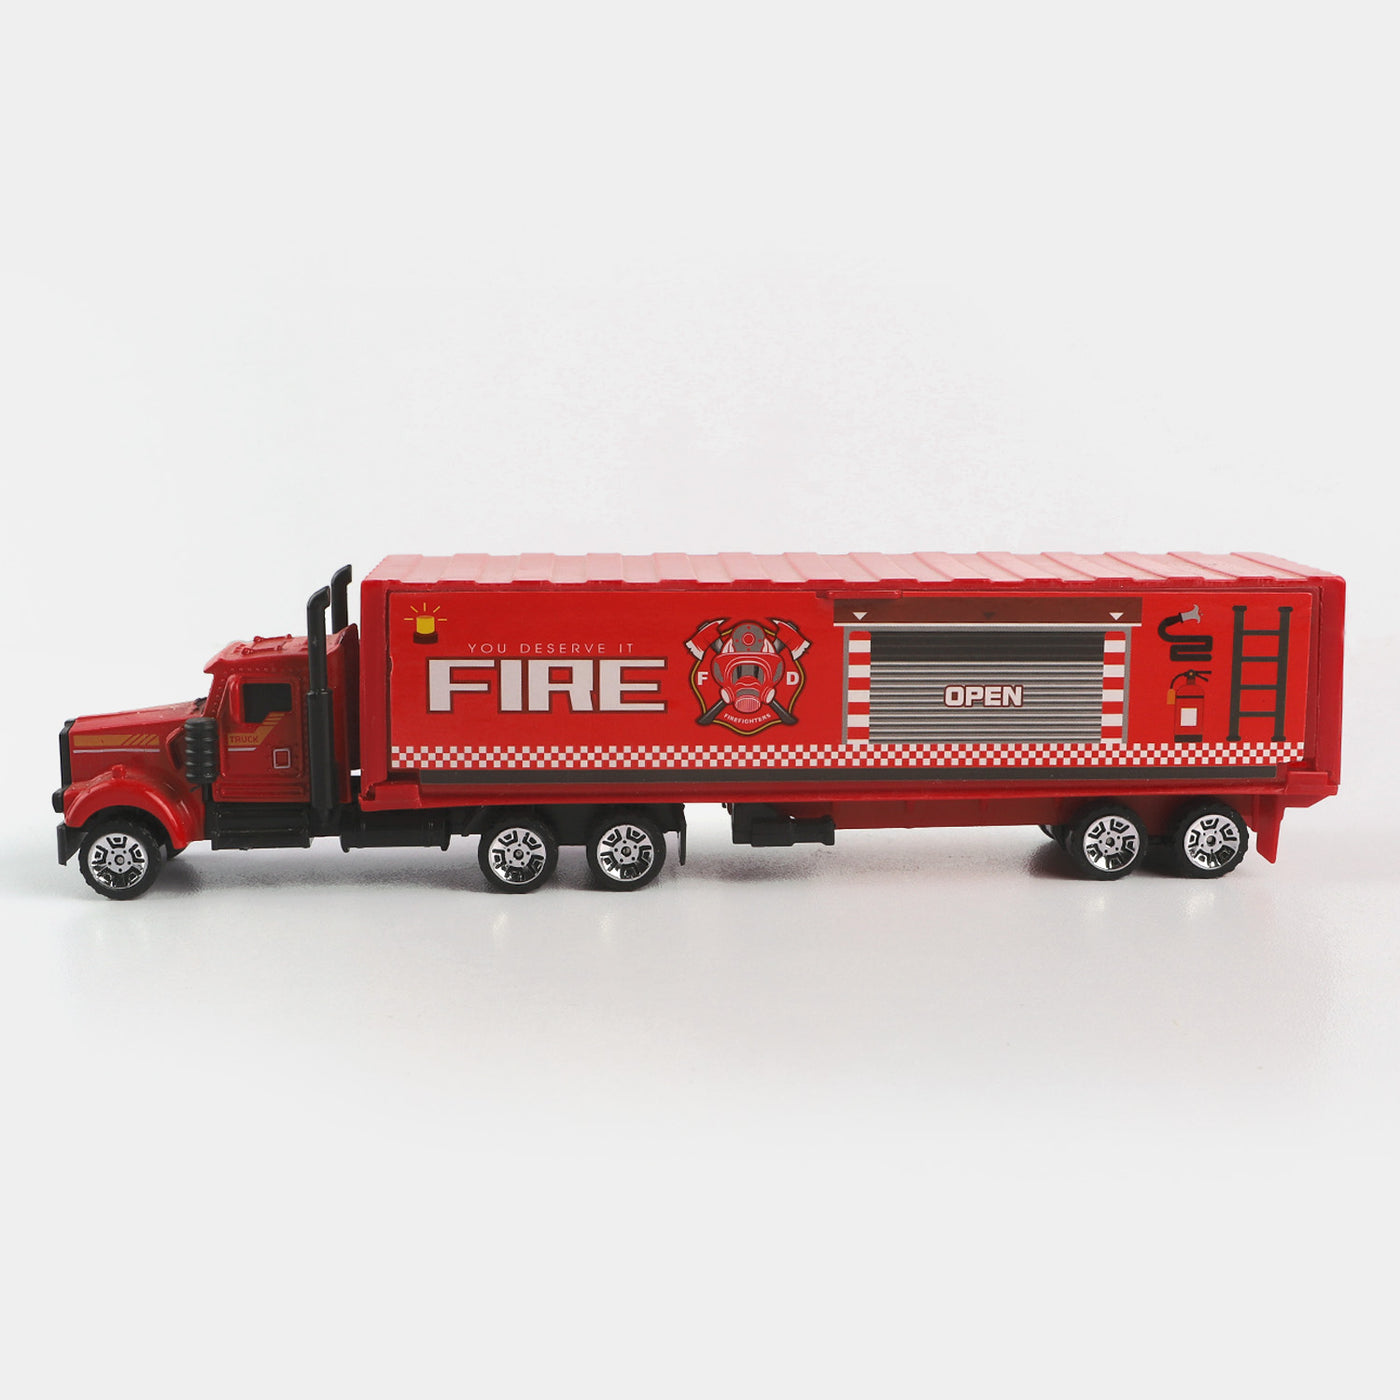 Fire Rescue Truck With 4Pcs Fire Vehicles For Kids